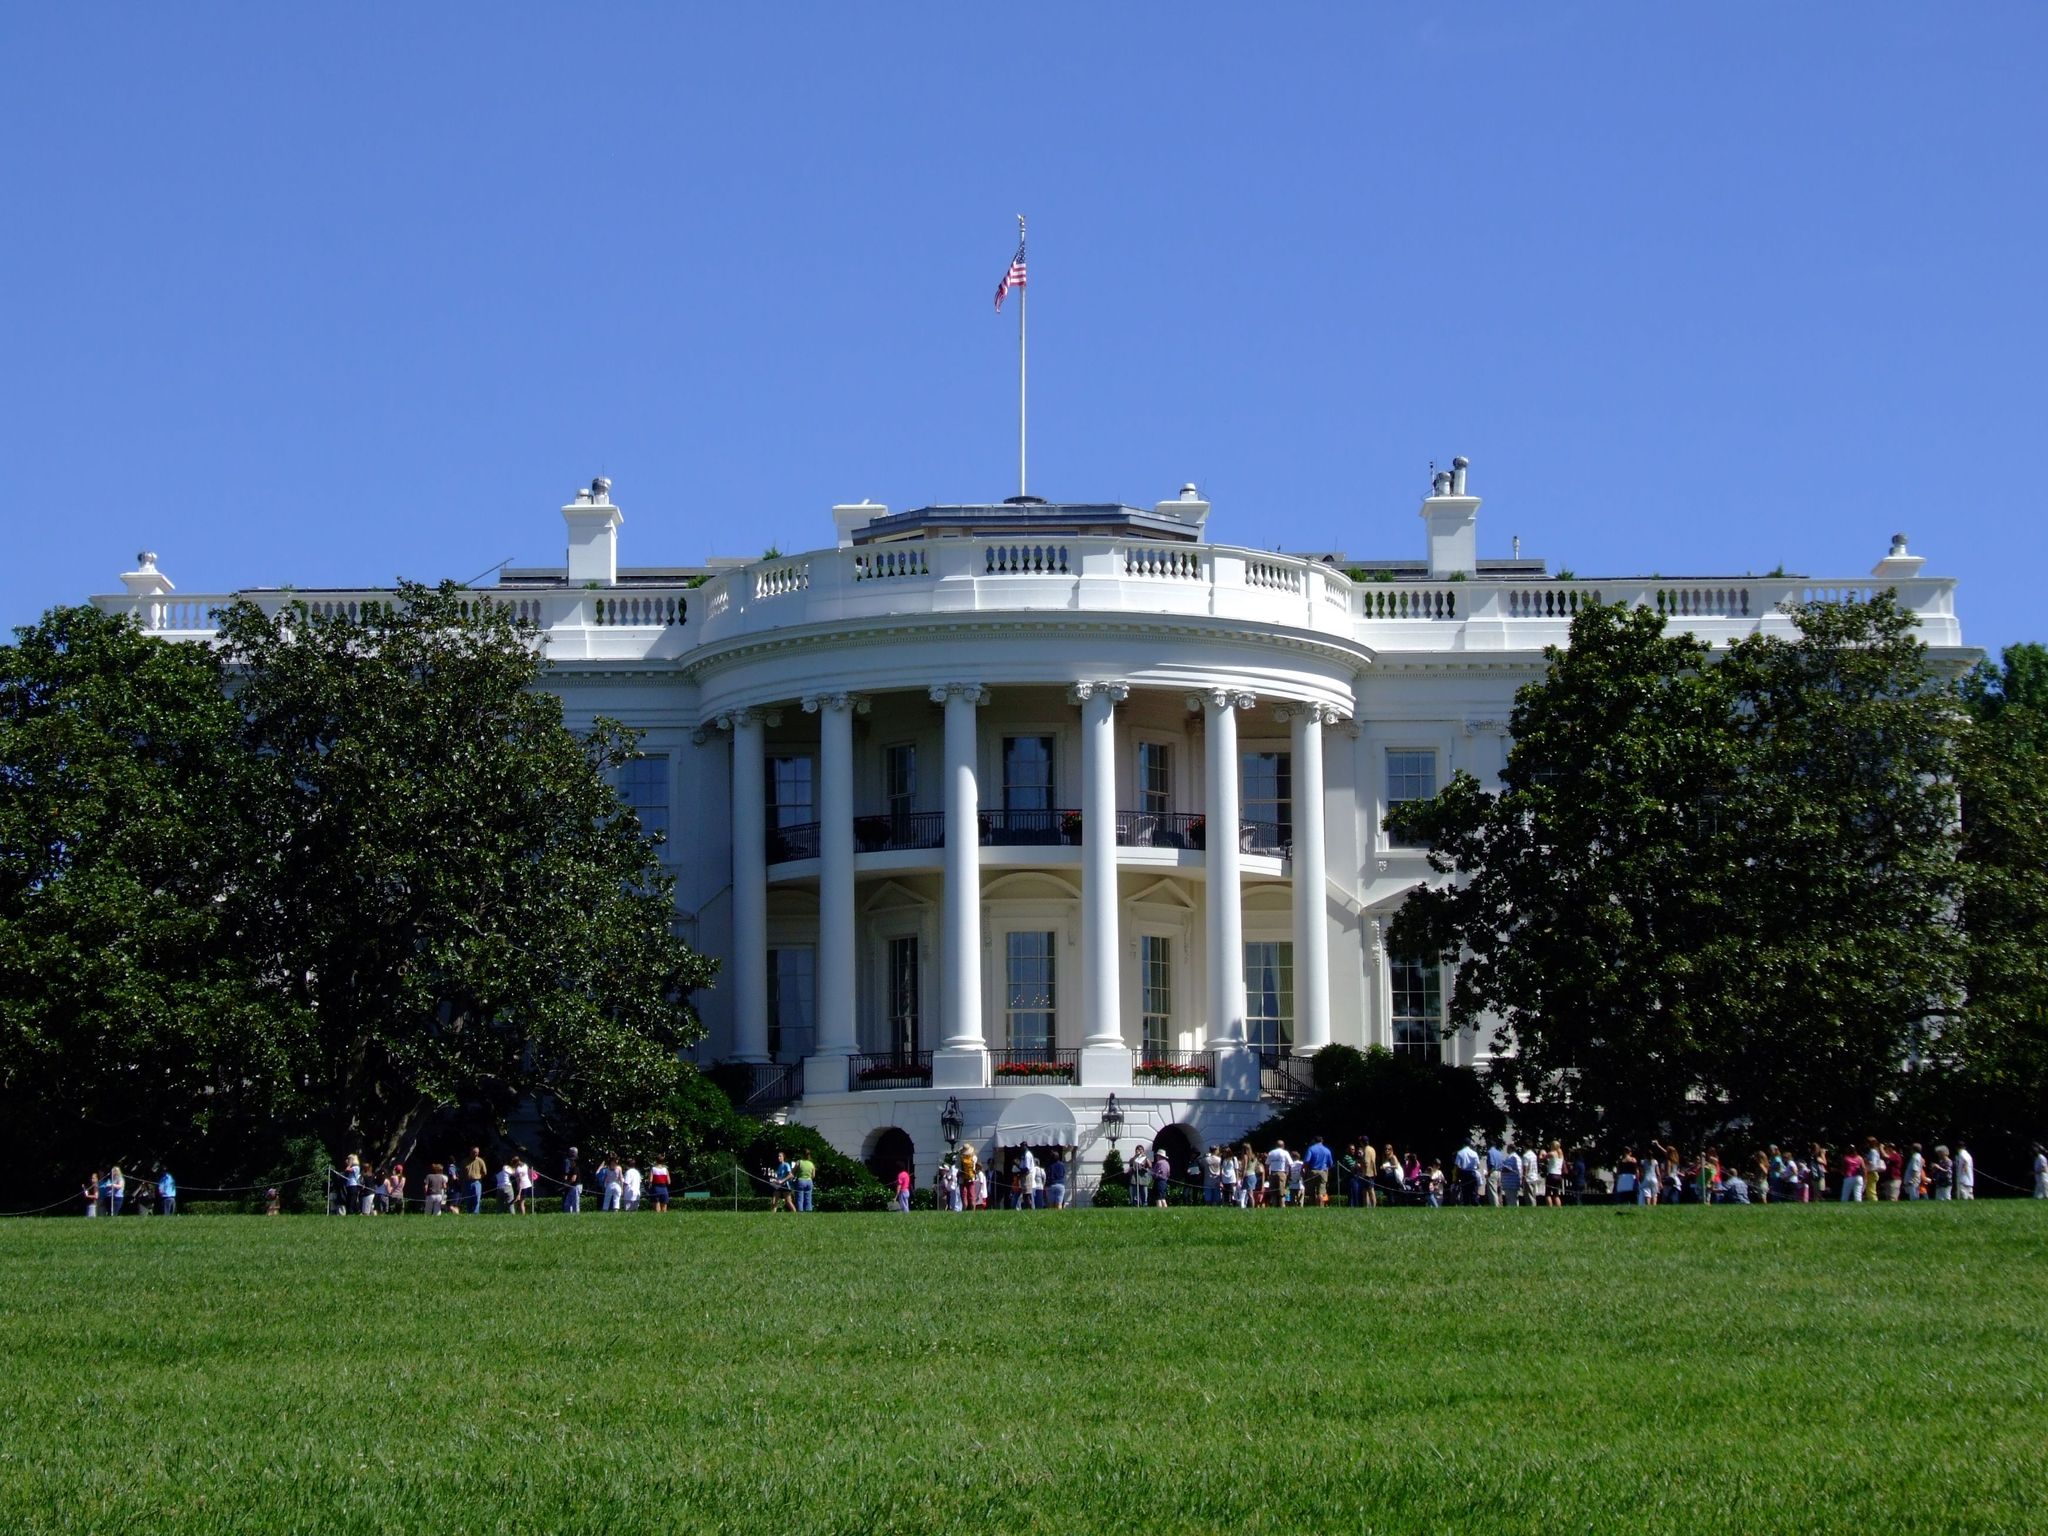 The White House and South Lawn